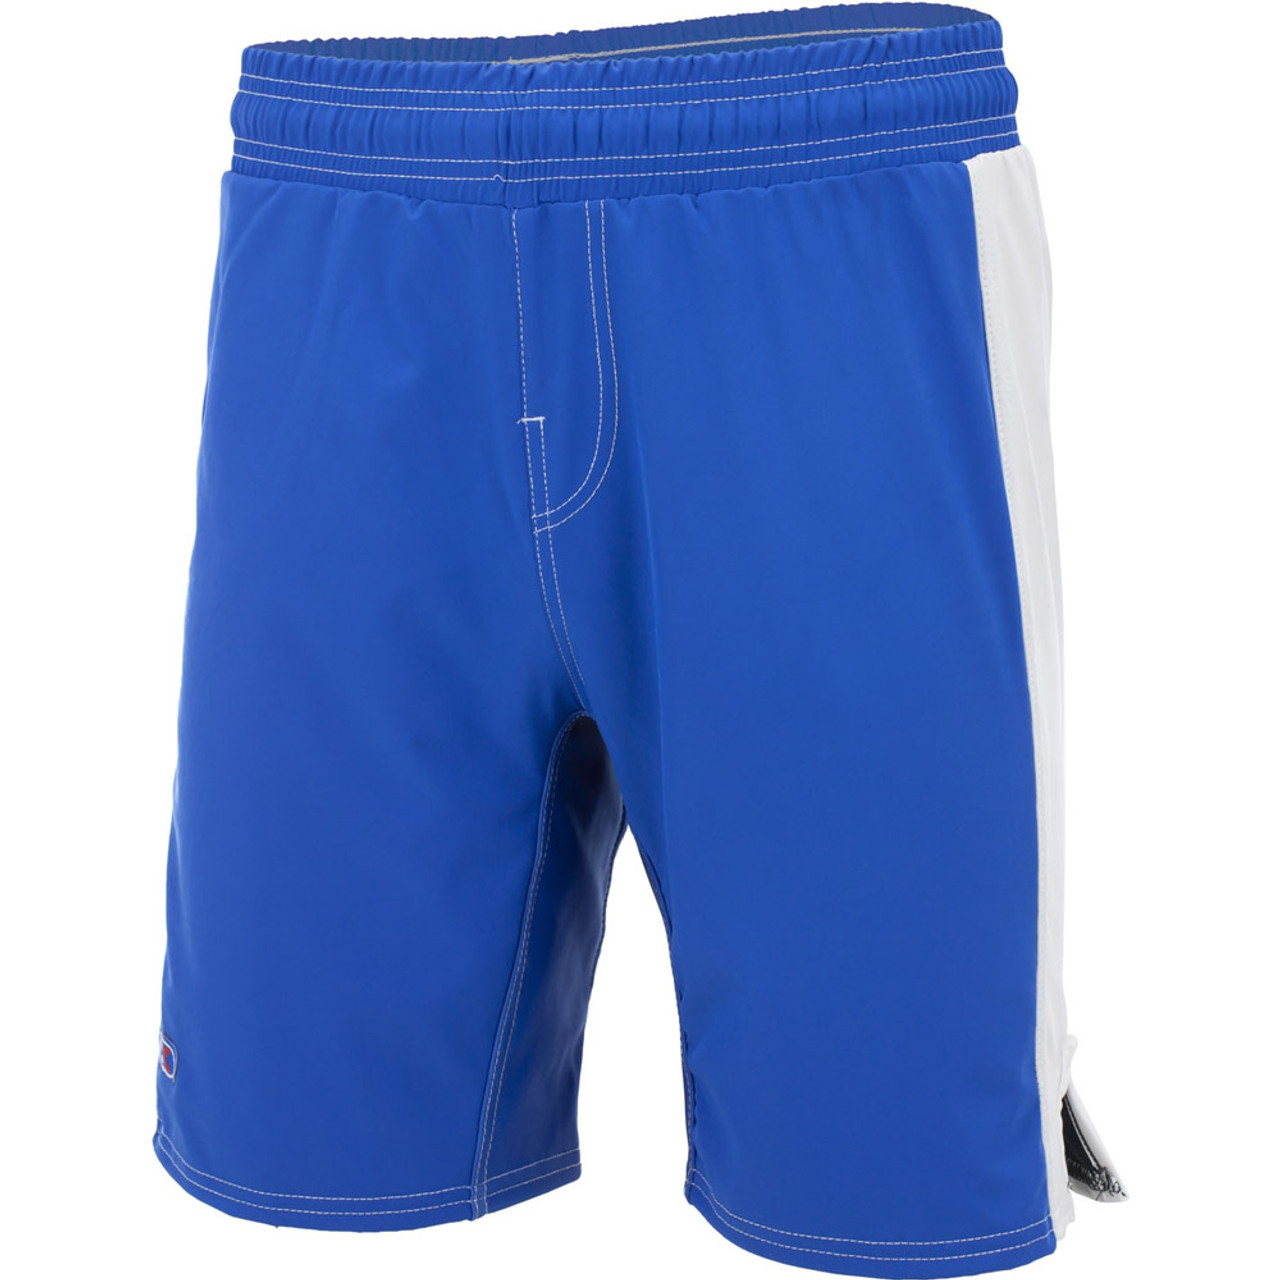 BOARD SHORTS WITH SIDE PANELS - Dick Pond Athletics